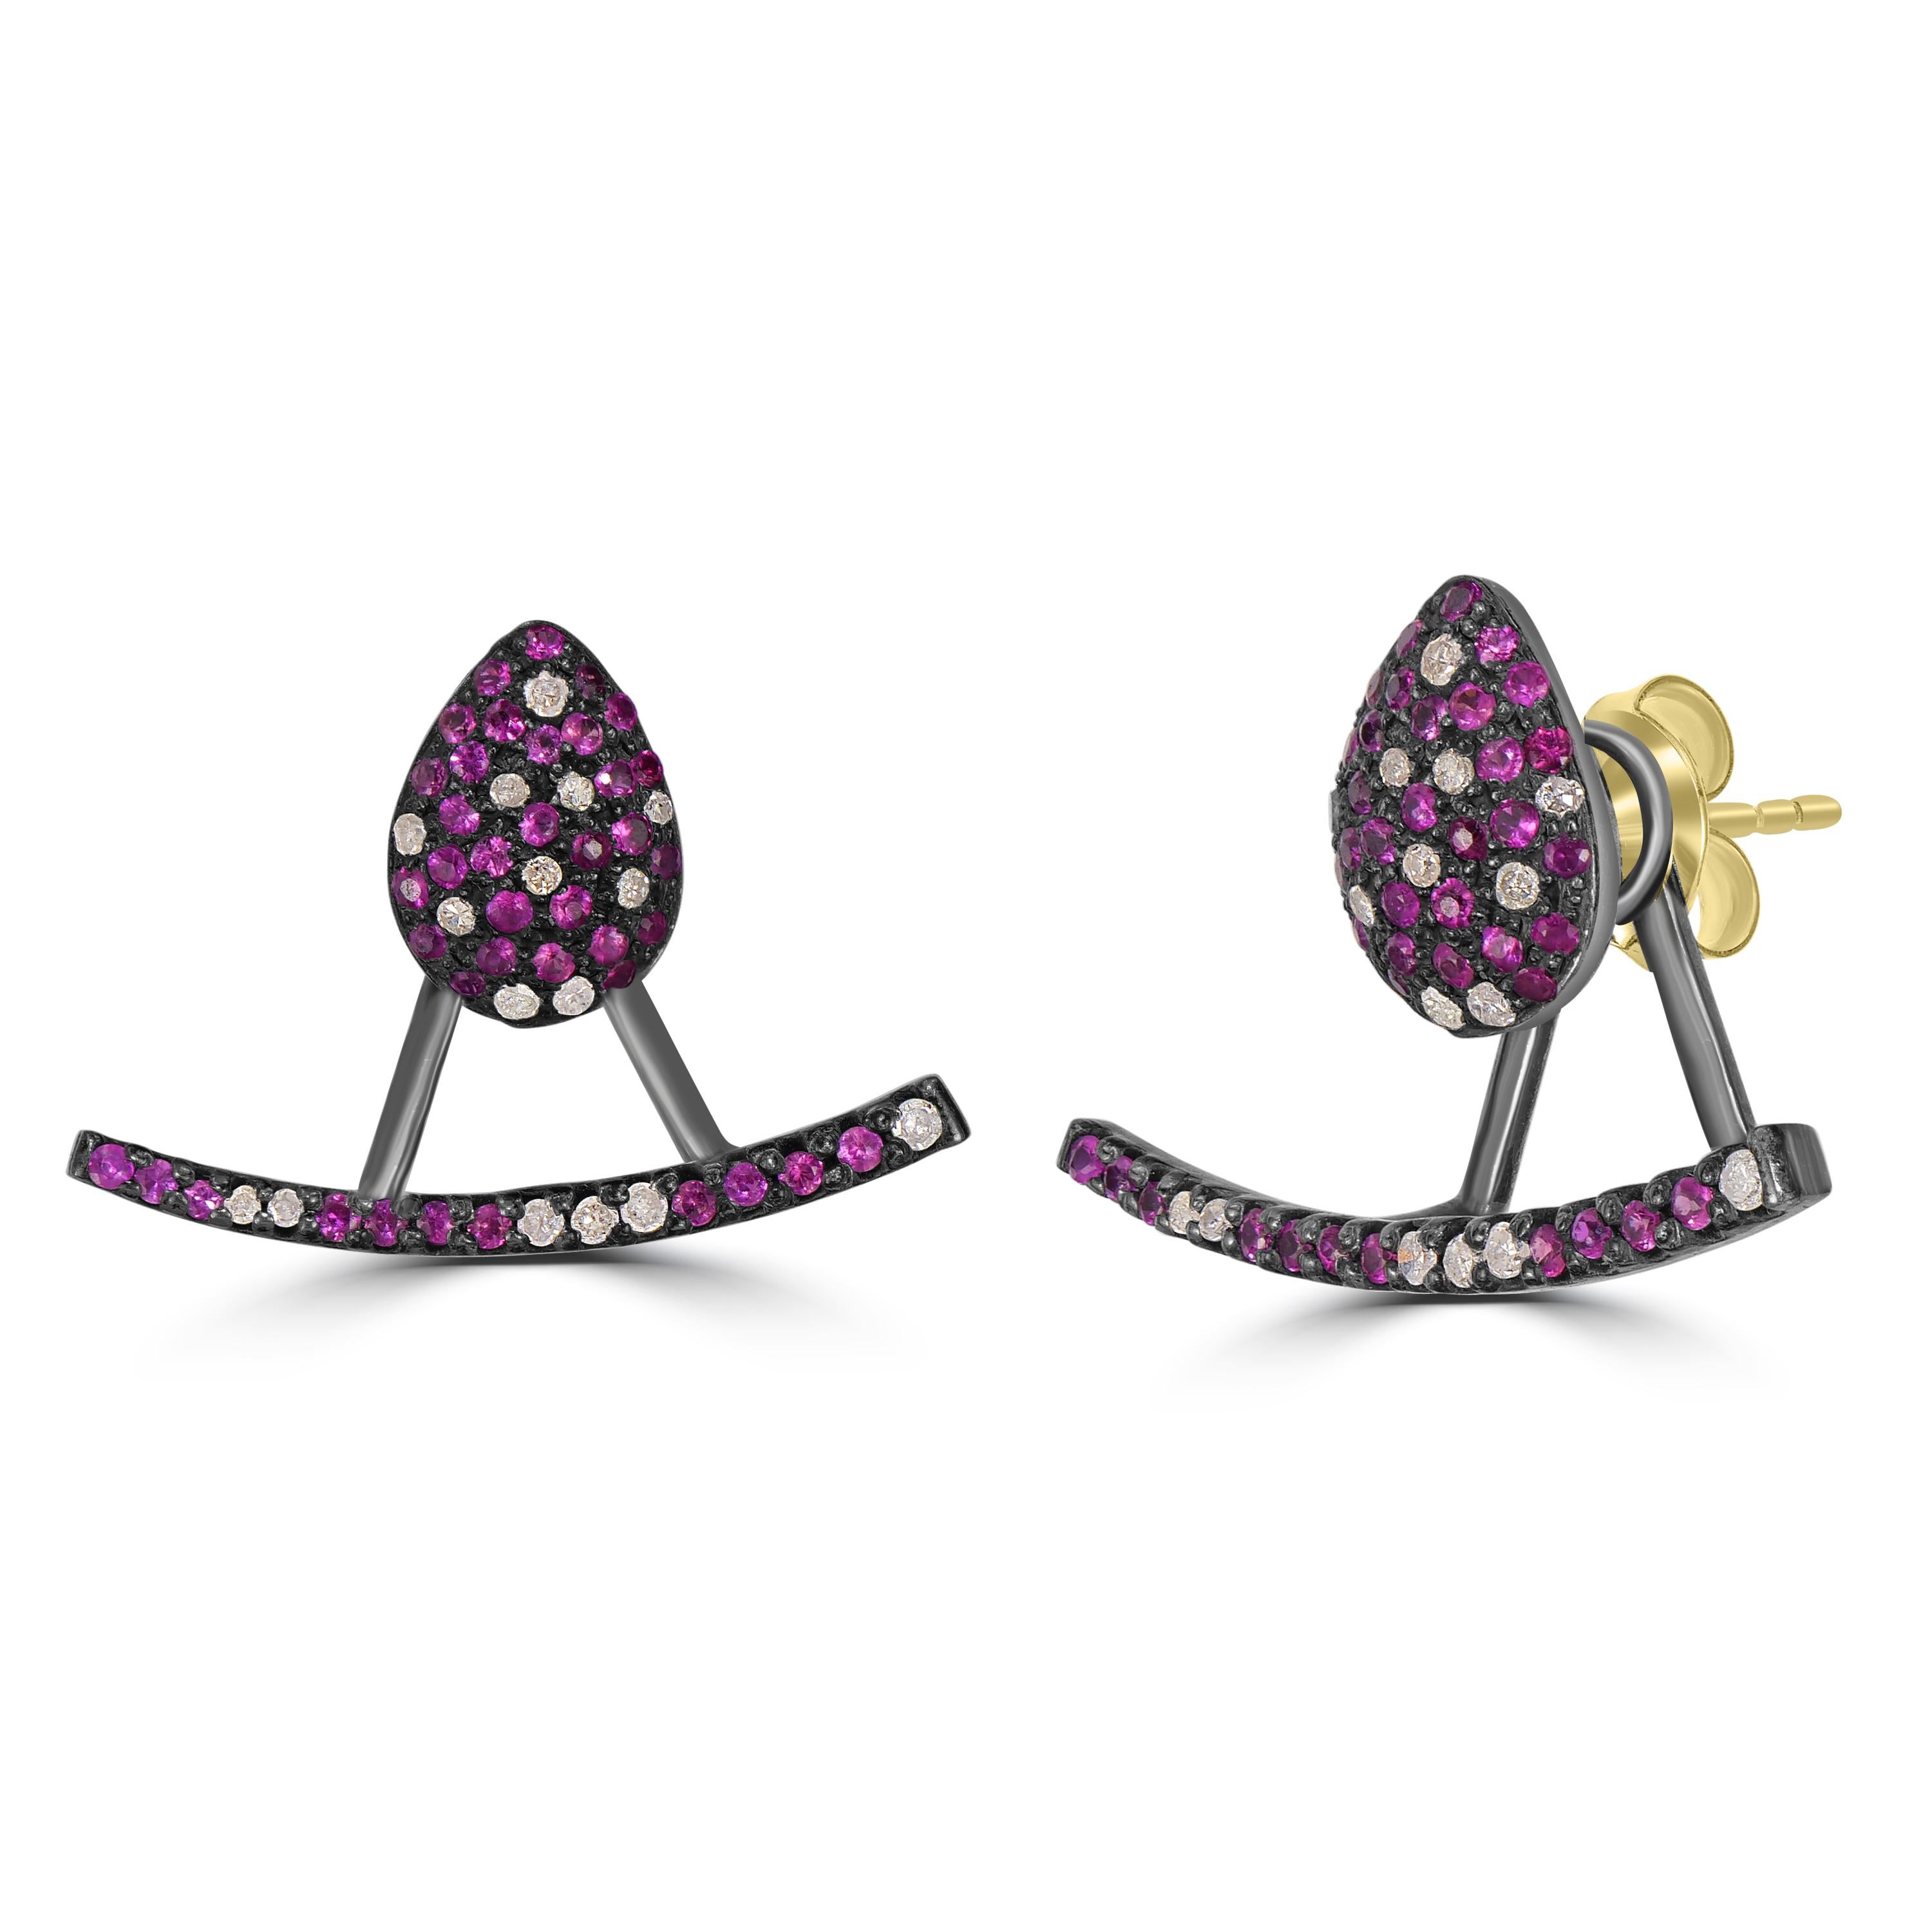 Experience the thrill of winter sports transformed into a wearable art form with these Victorian 1.42 Cttw. Ruby and Diamond Double Sided Stud Earrings. Crafted to resemble a skier in mid-descent, these earrings capture the dynamic essence of skiing